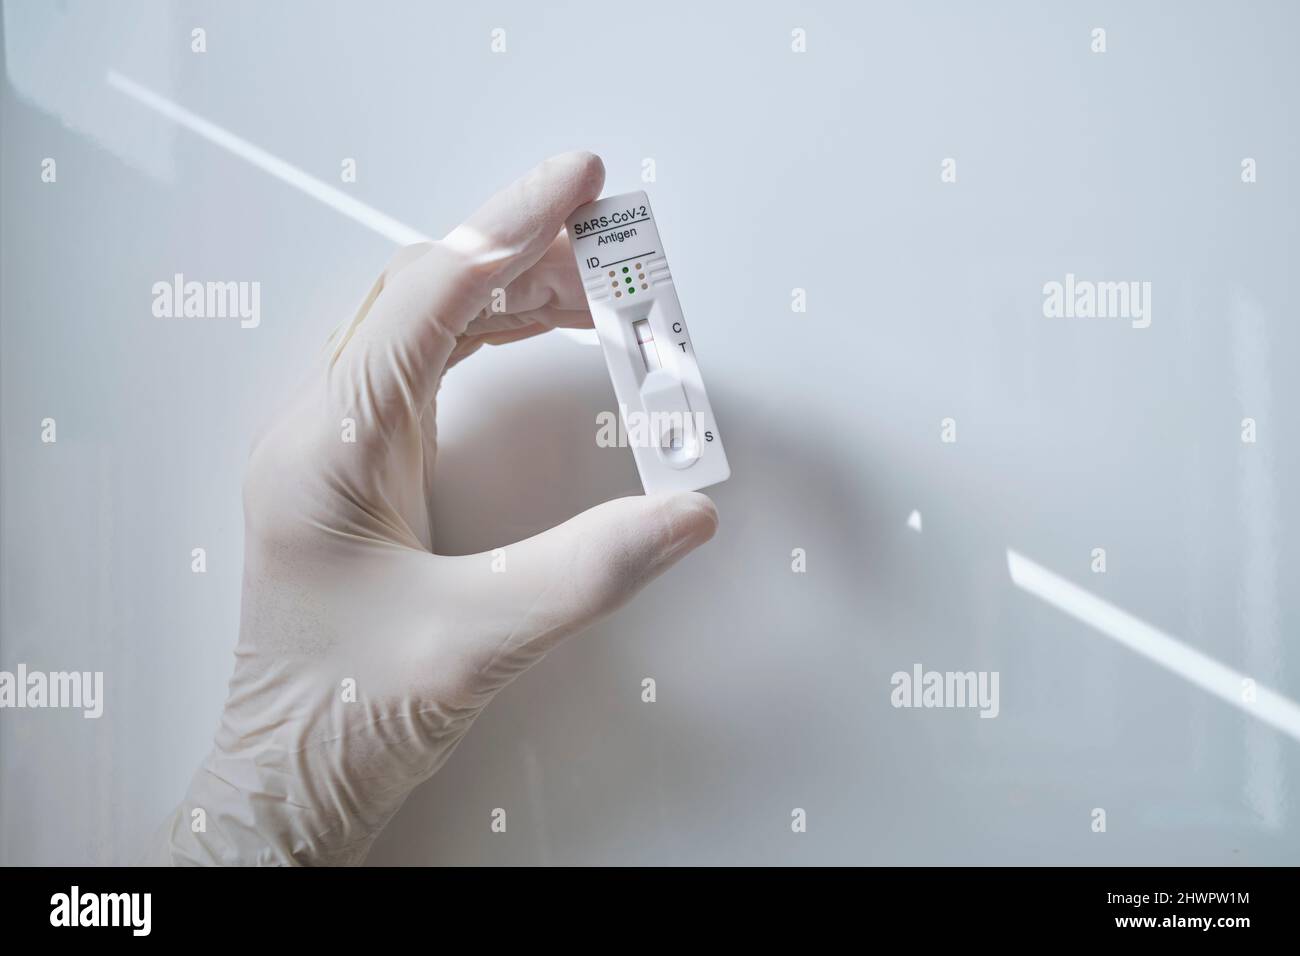 Hand holding rapid diagnostic device showing COVID-19 negative results against white background Stock Photo